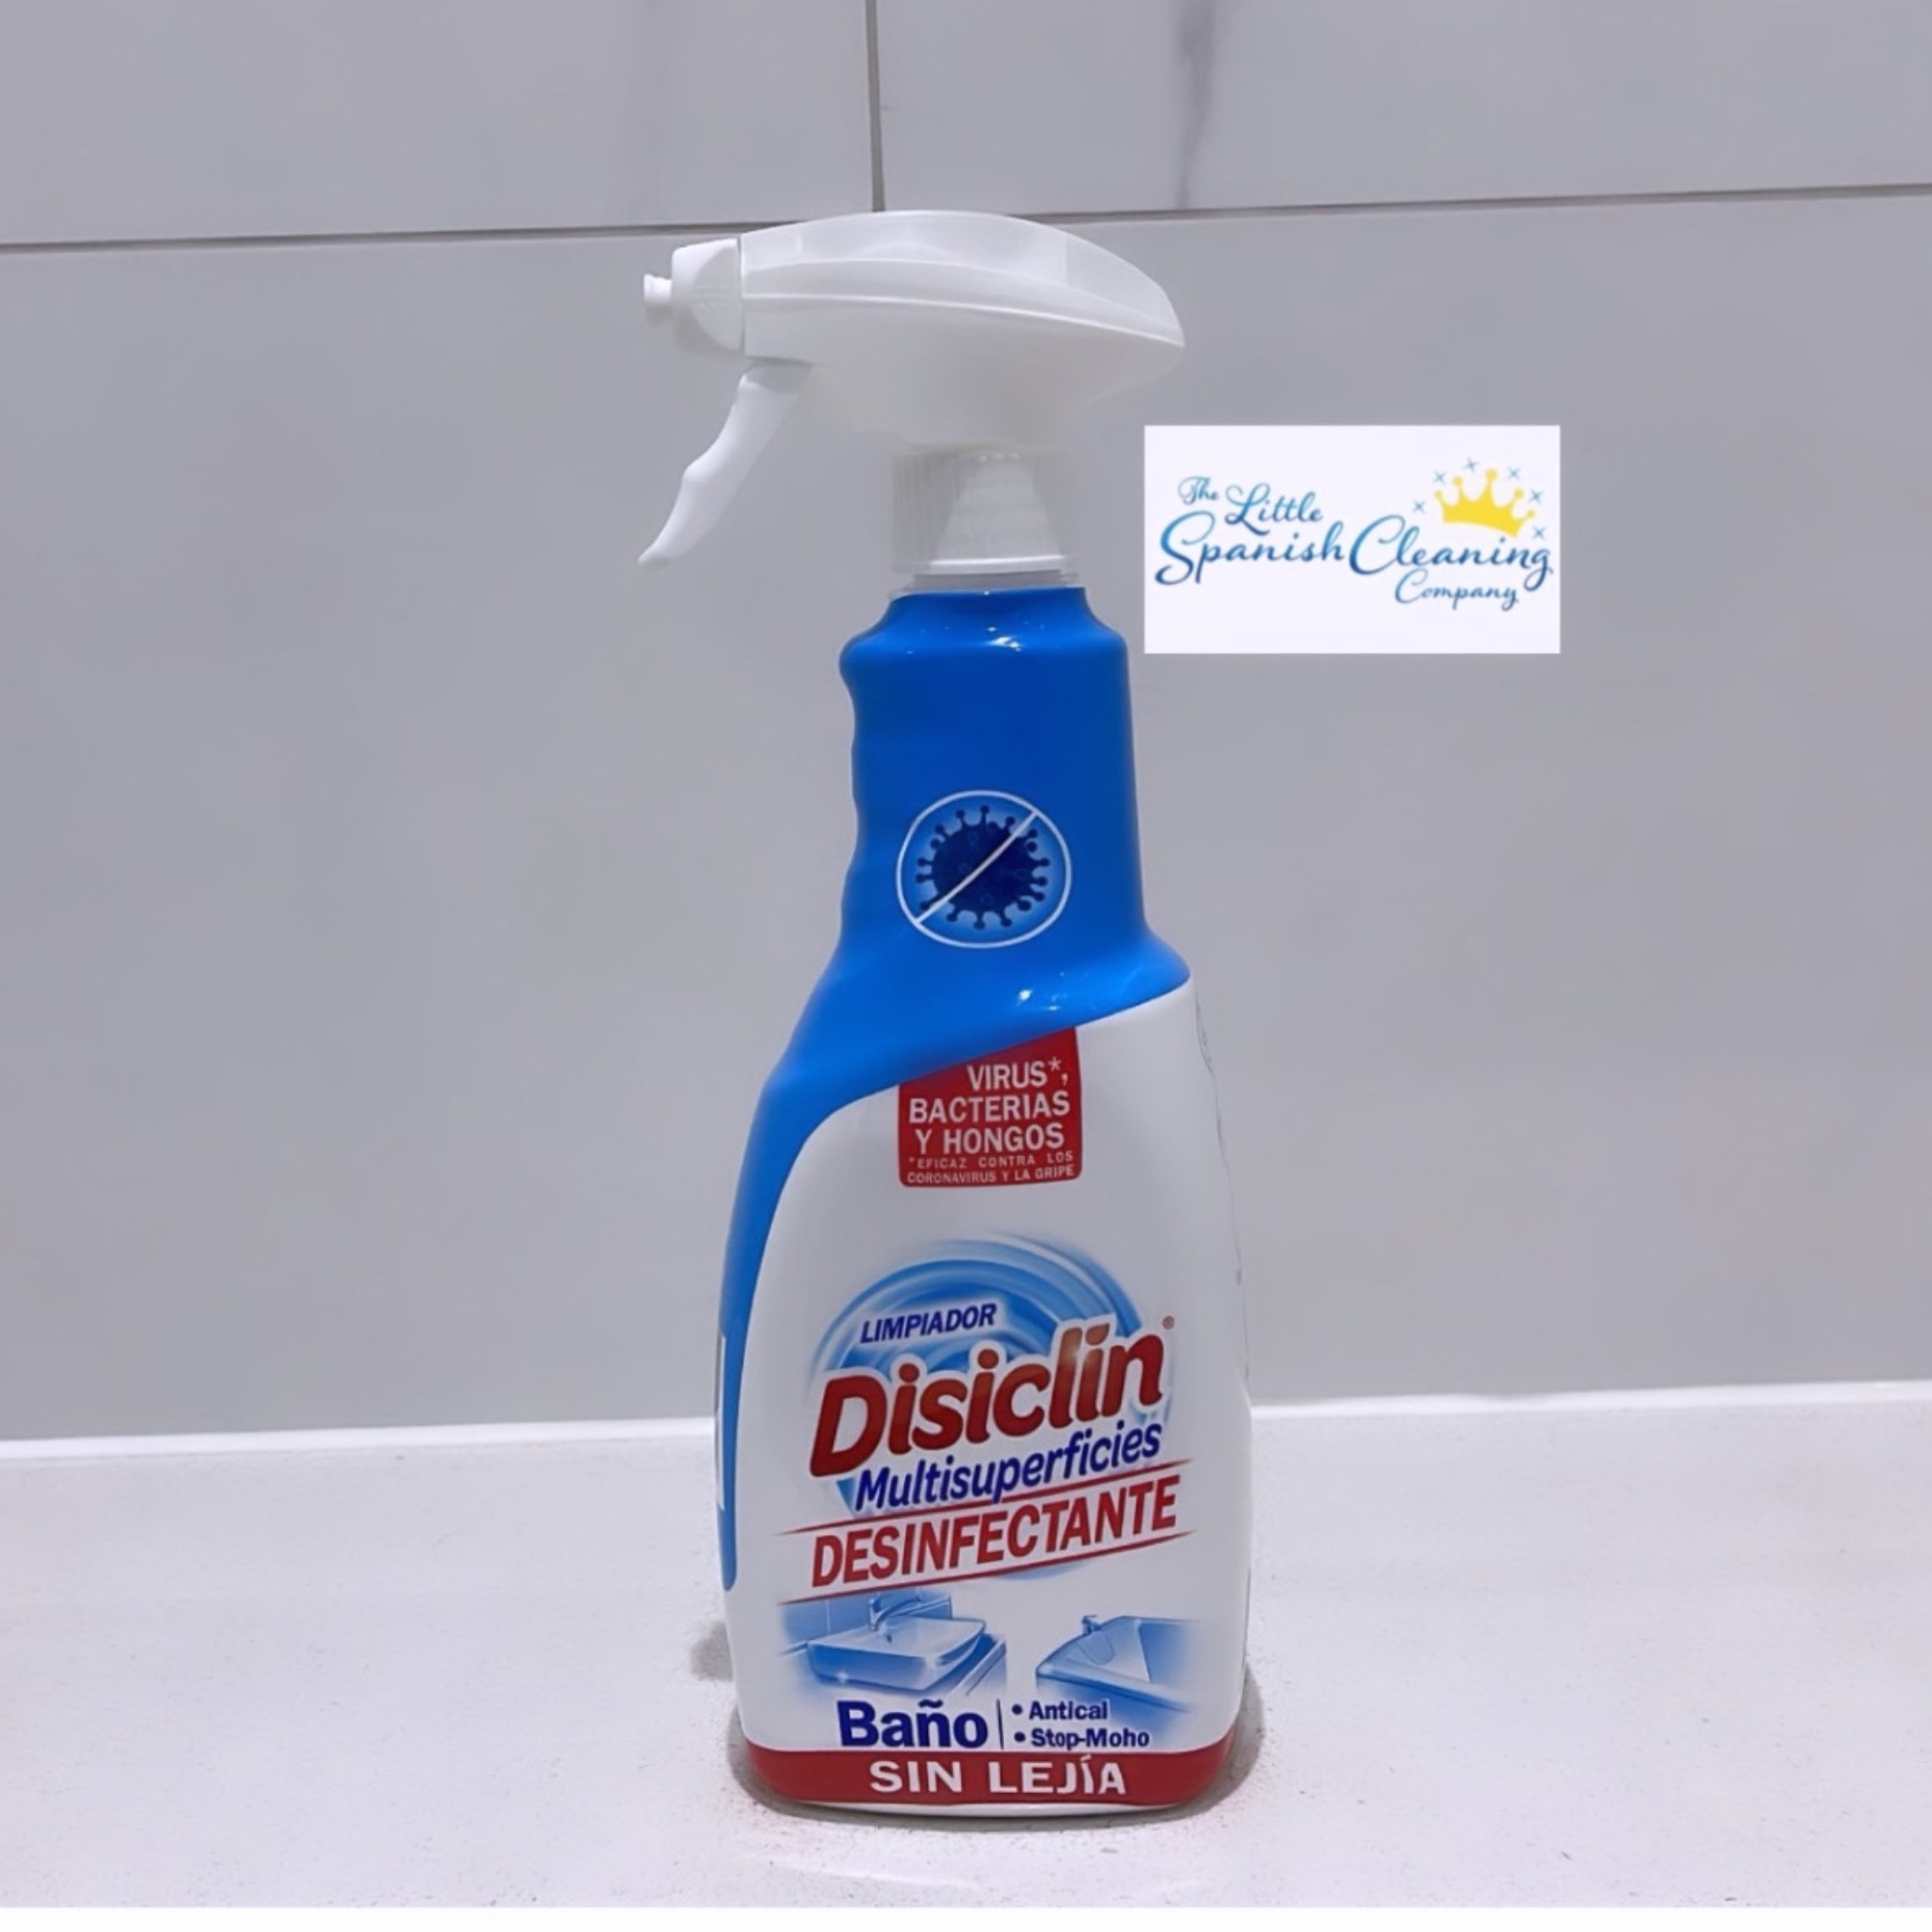 Disiclin Foam Disinfectant Spray – The Little Spanish Cleaning Company